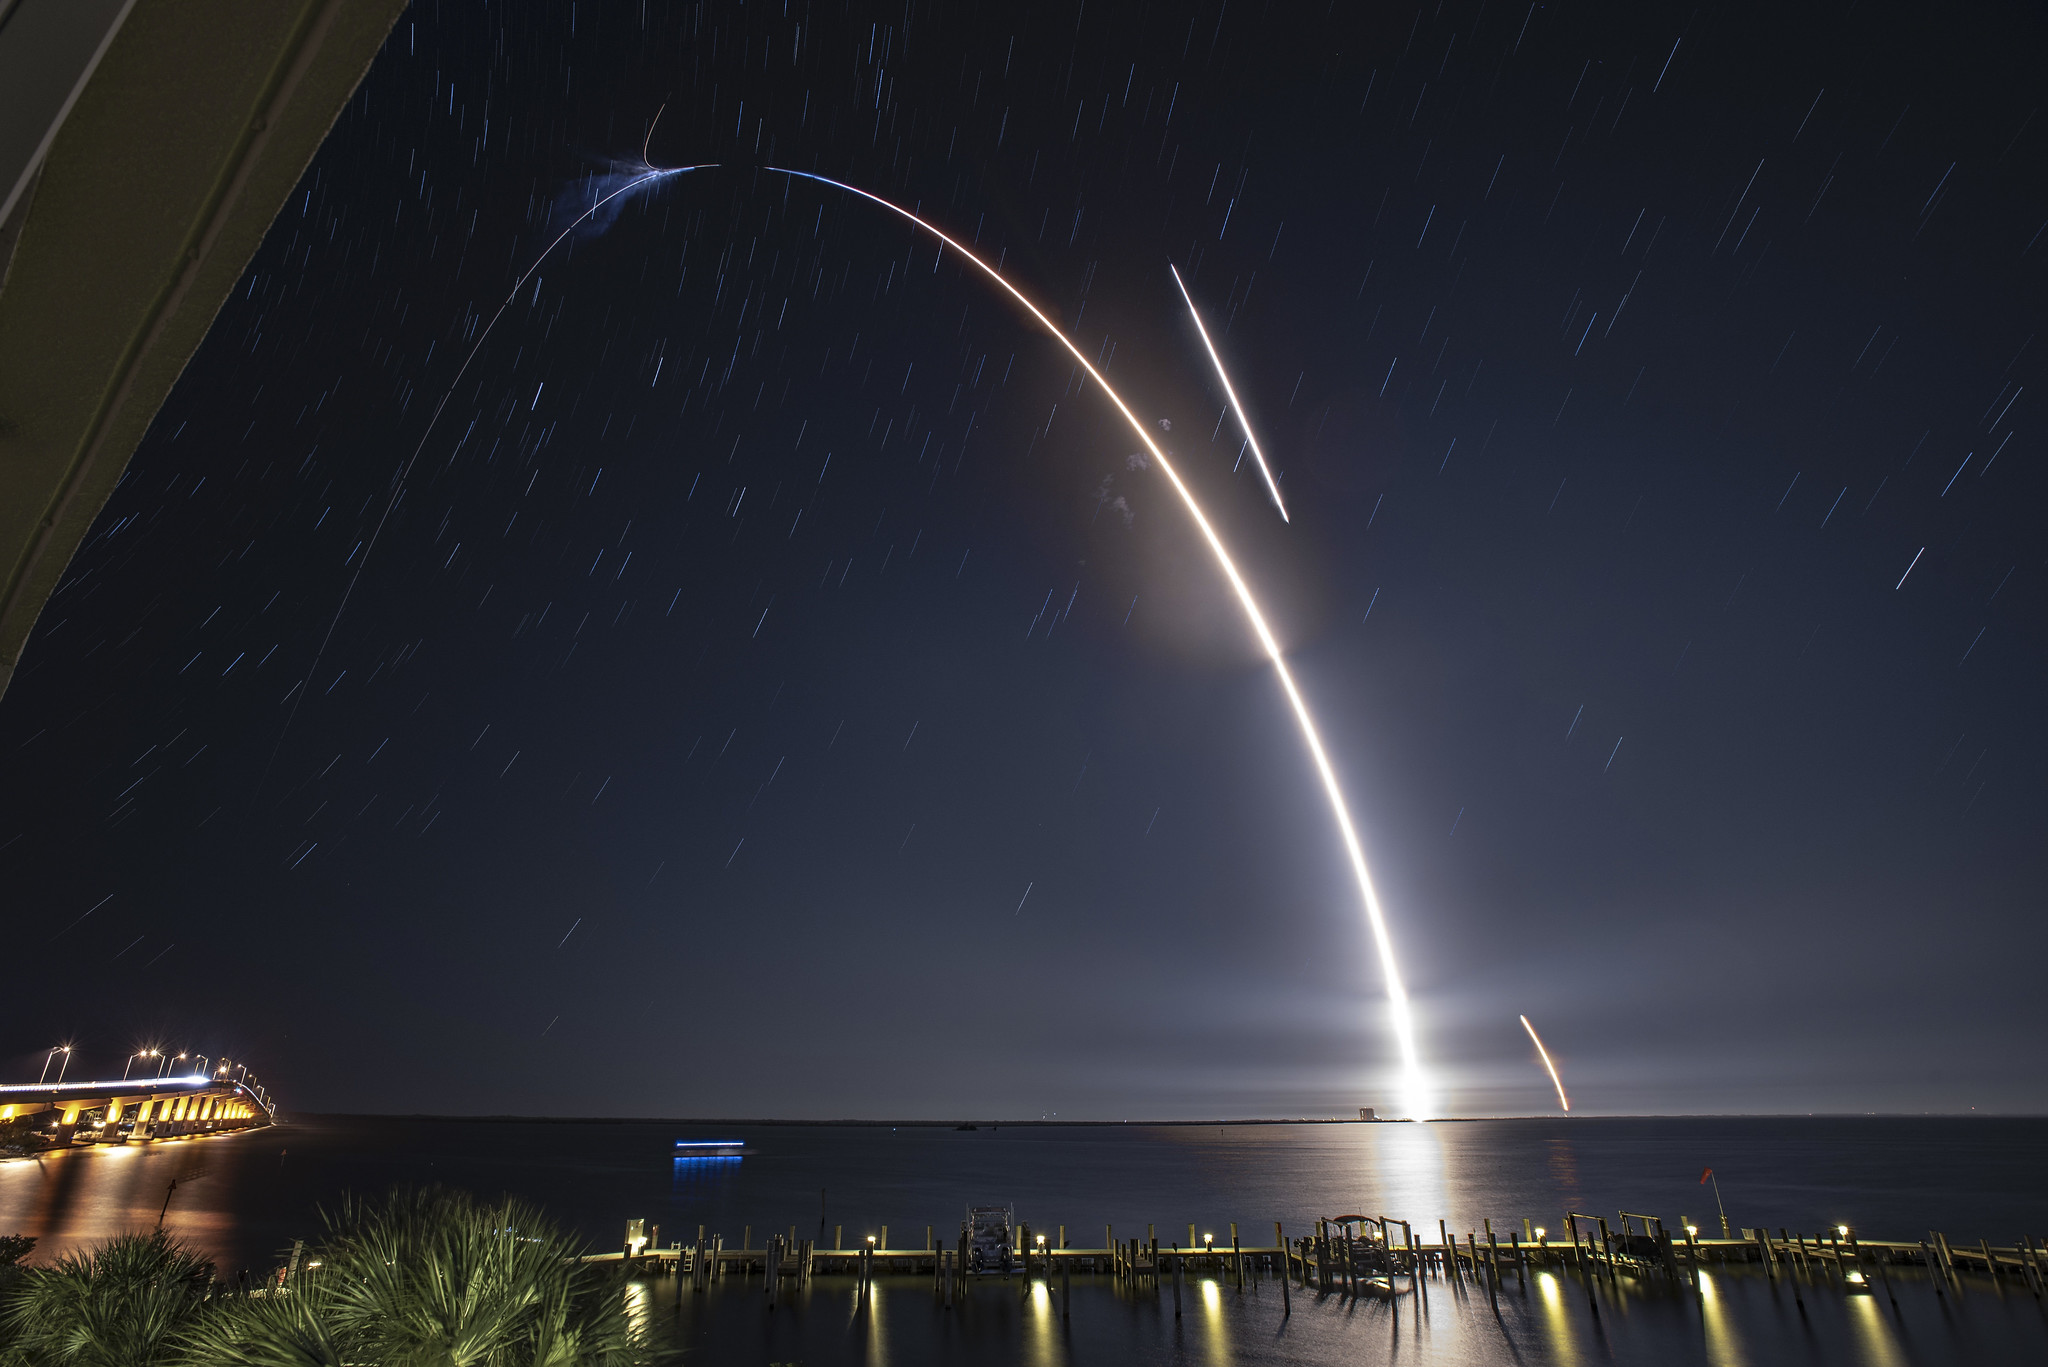 SpaceX resupply mission launching in the night sky 